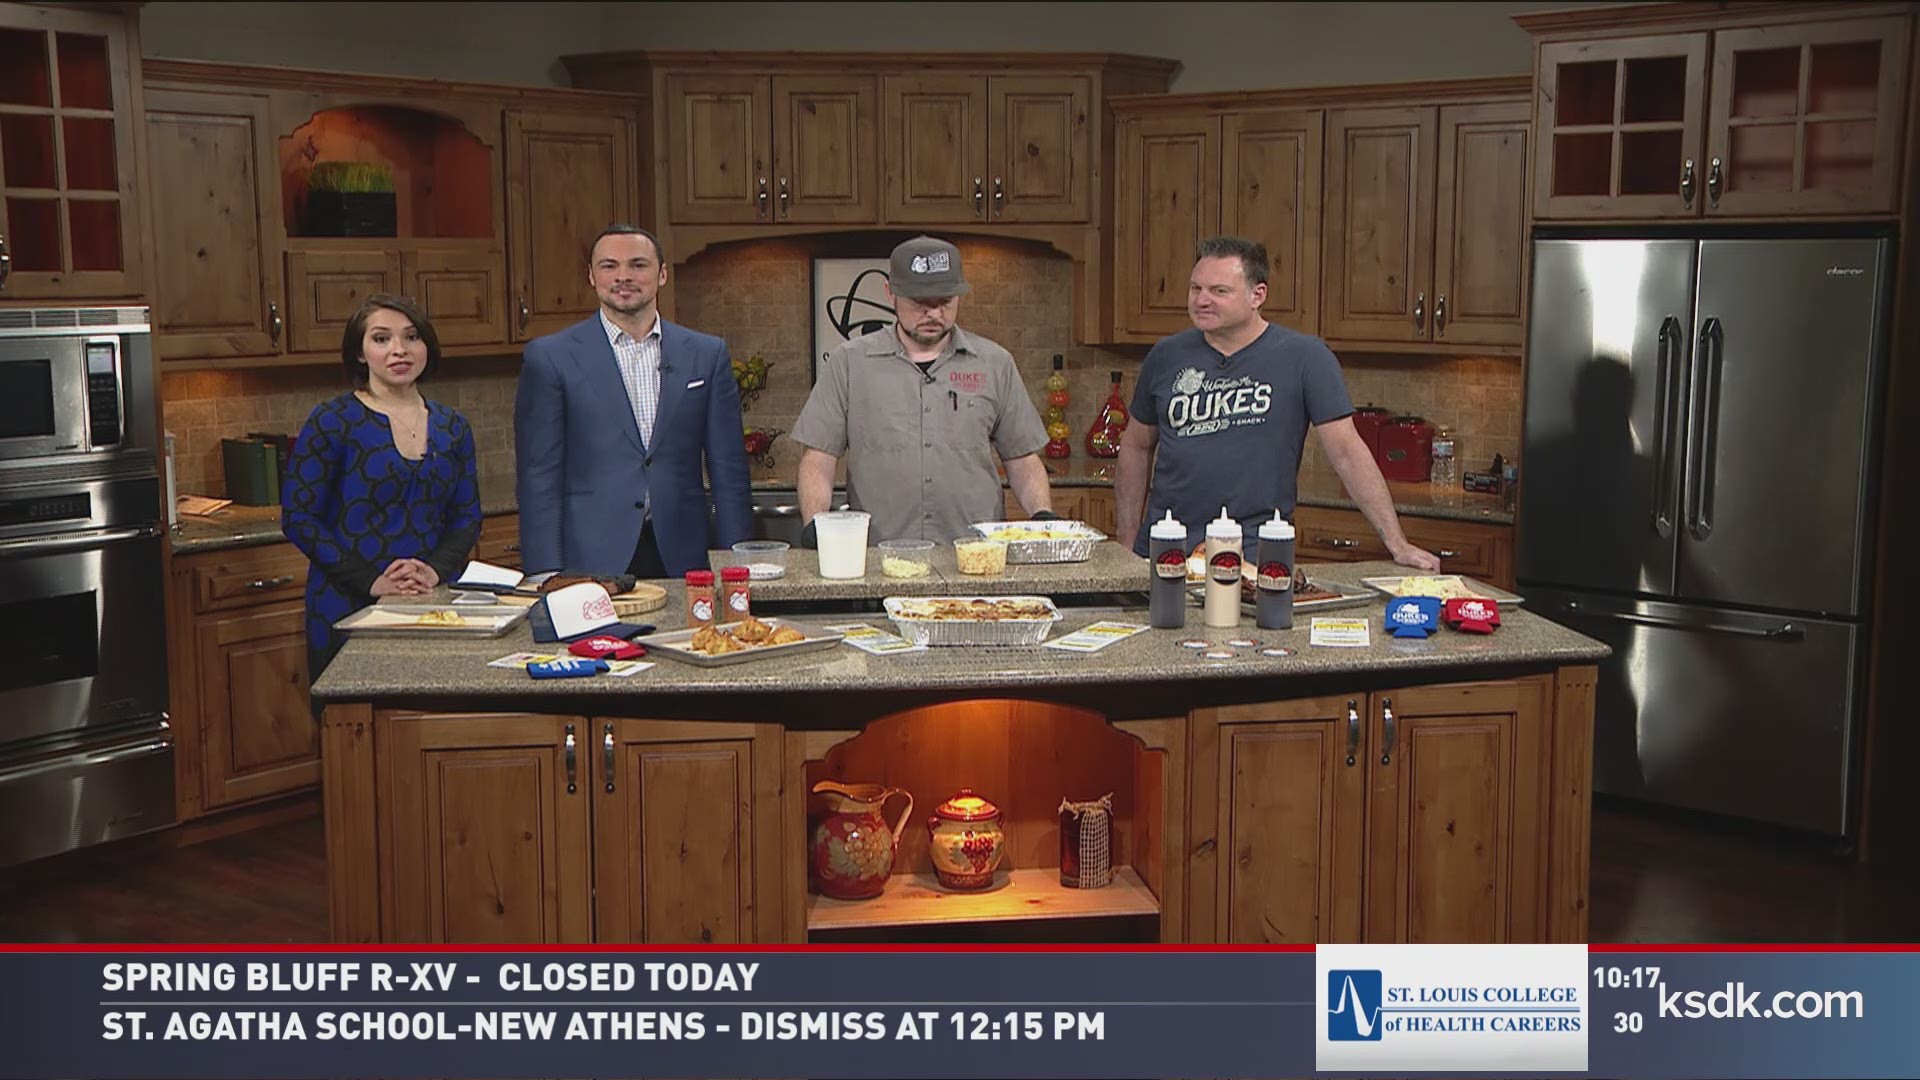 Dukes BBQ whipped up some Smoked Gouda Casserole in the Show Me St. Louis kitchen today.